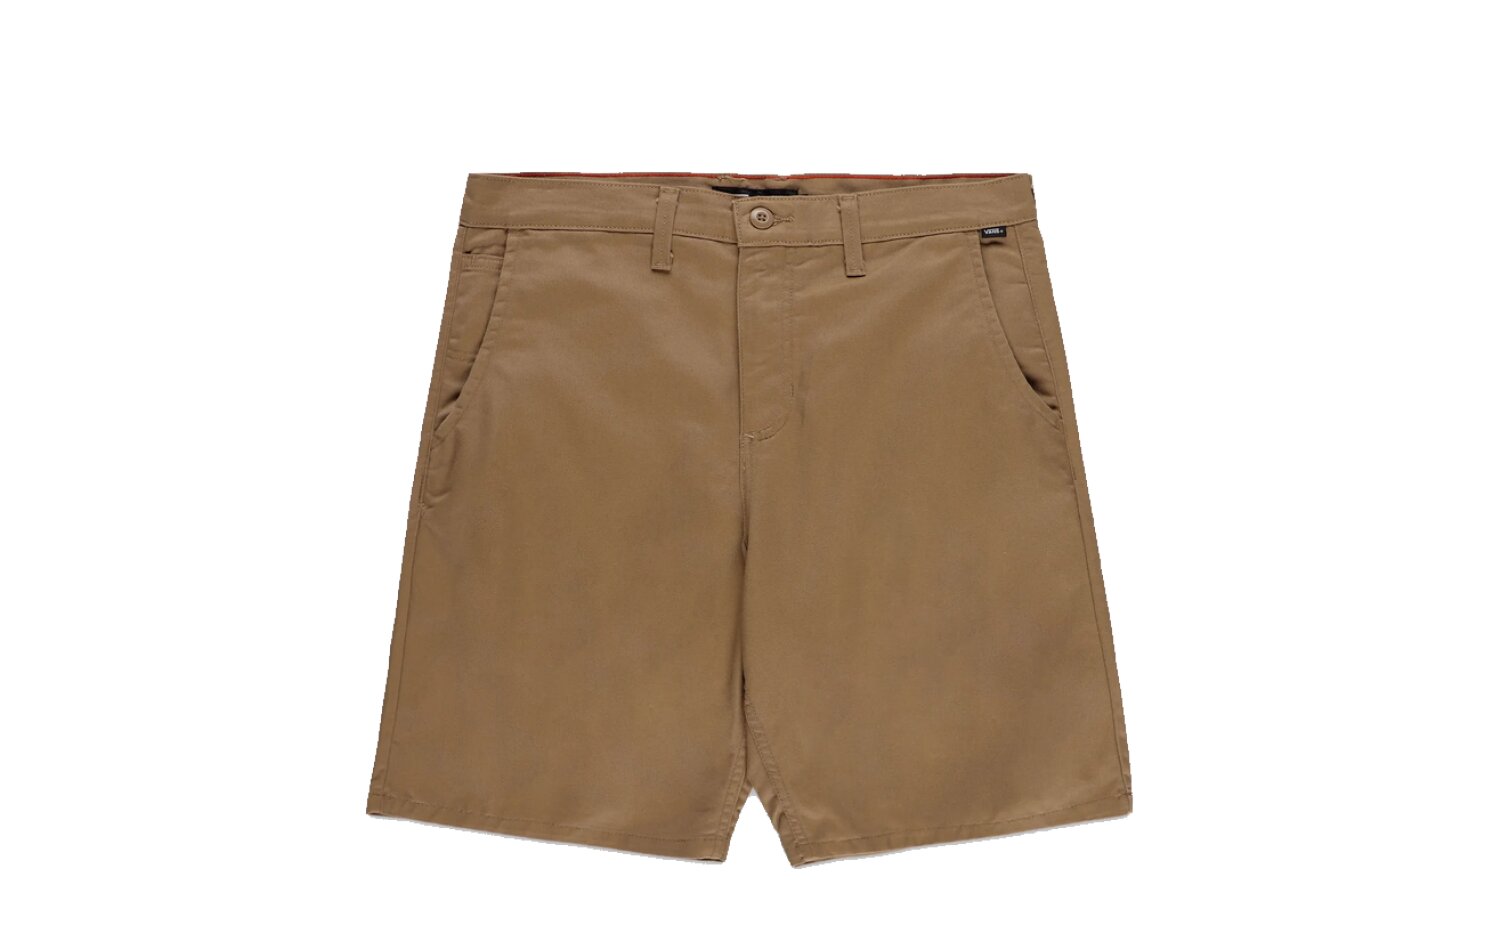 Vans Authentic Chino Relaxed Short (VN0A5FJXDZ9)